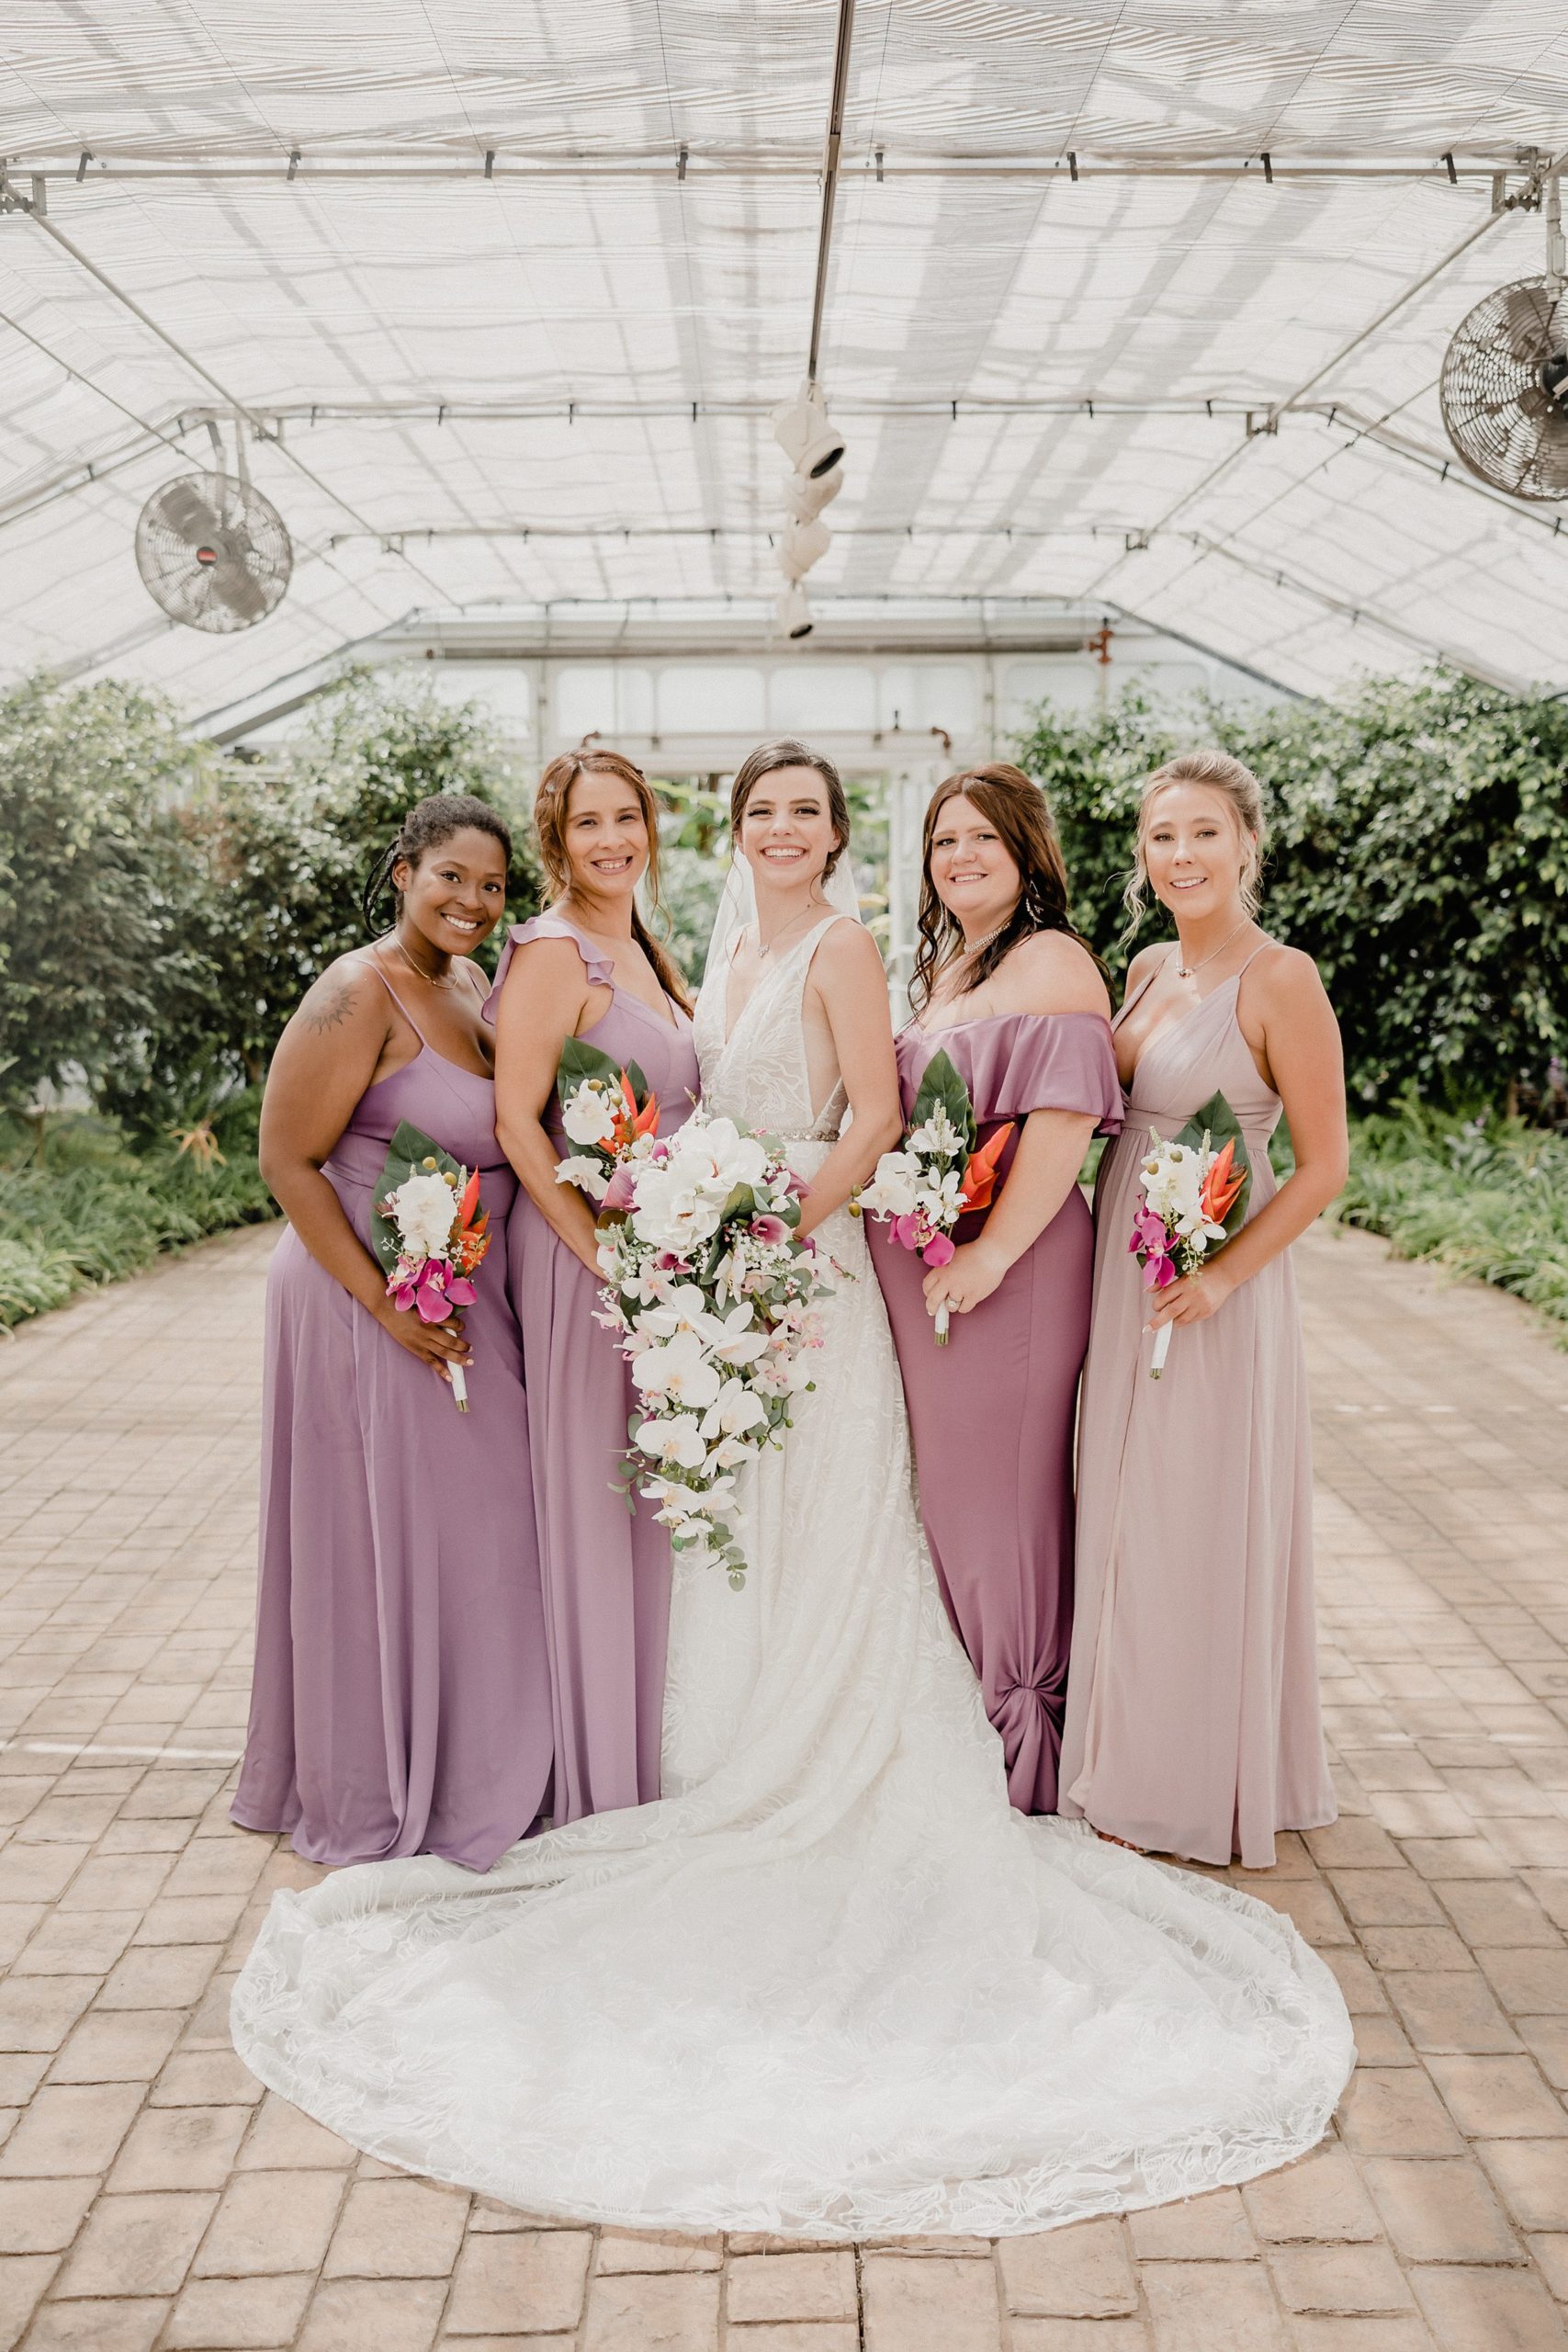 Bride and Bridesmaids during a wedding at the Bird Haven Greenhouse & Conservatory in Joliet, Illinois.